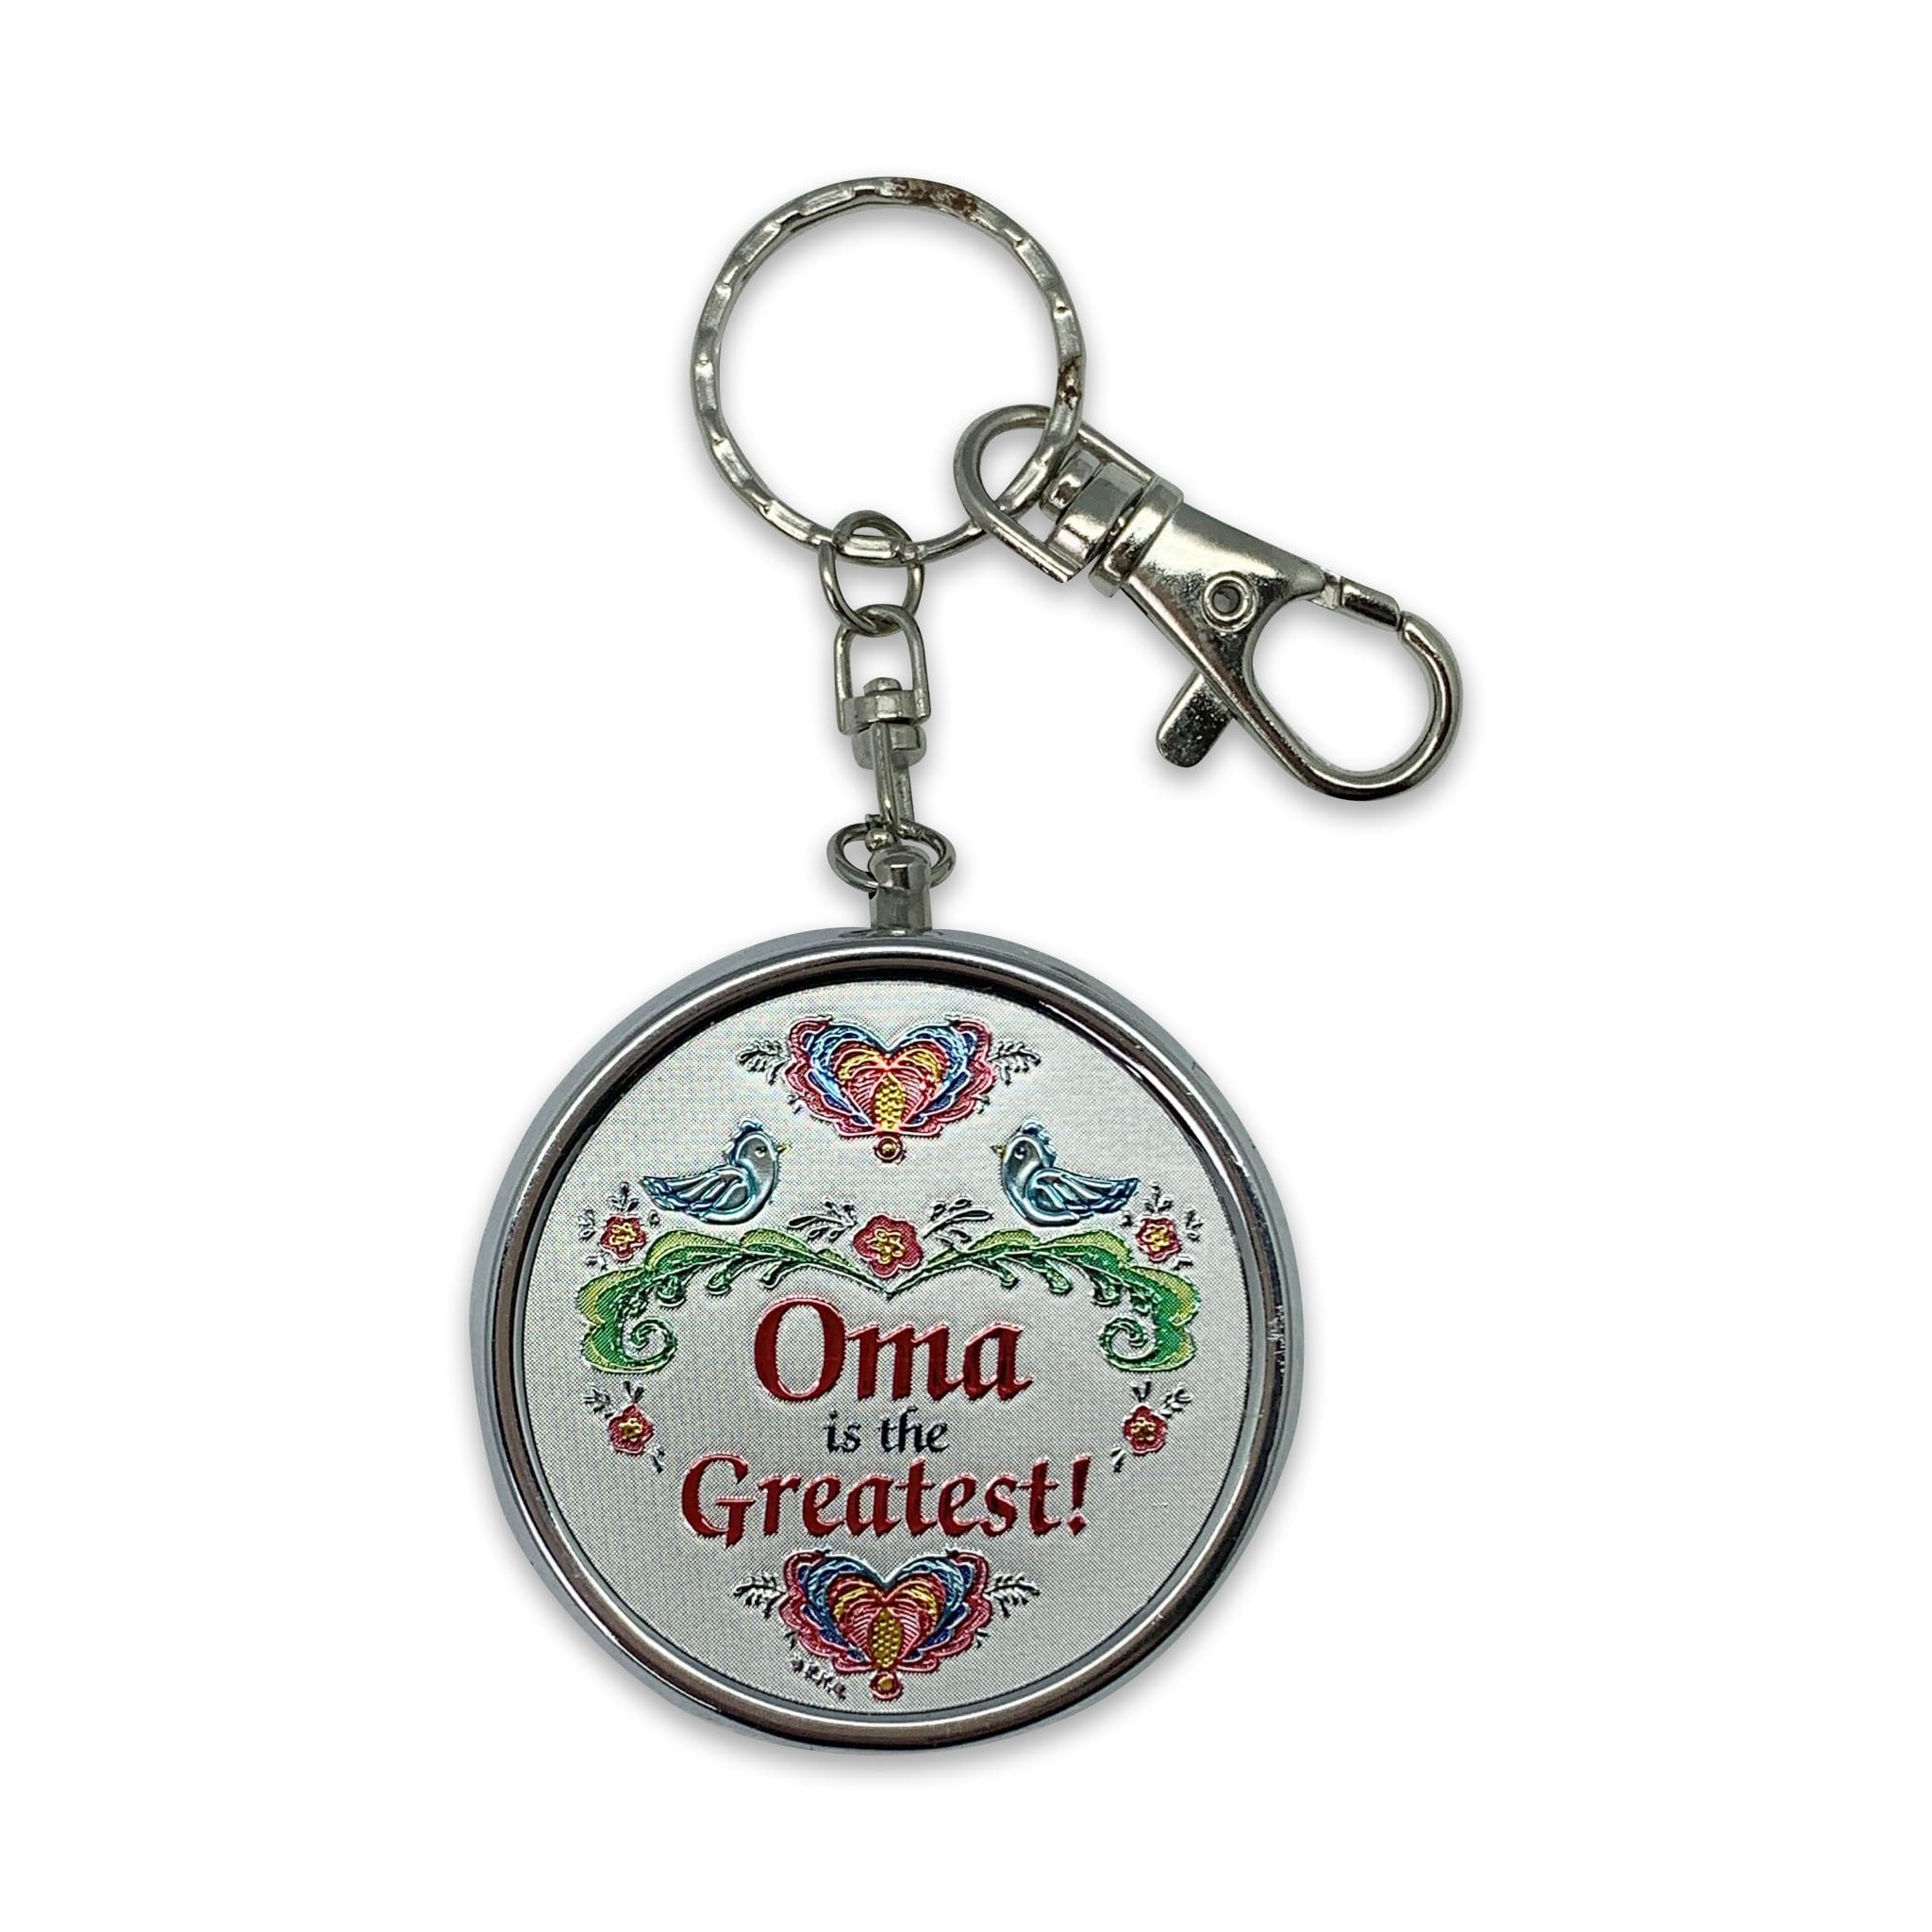 &amp;quot;Oma is the Greatest!&amp;quot; Metal Round Pill Box Keychain - Walmart.com